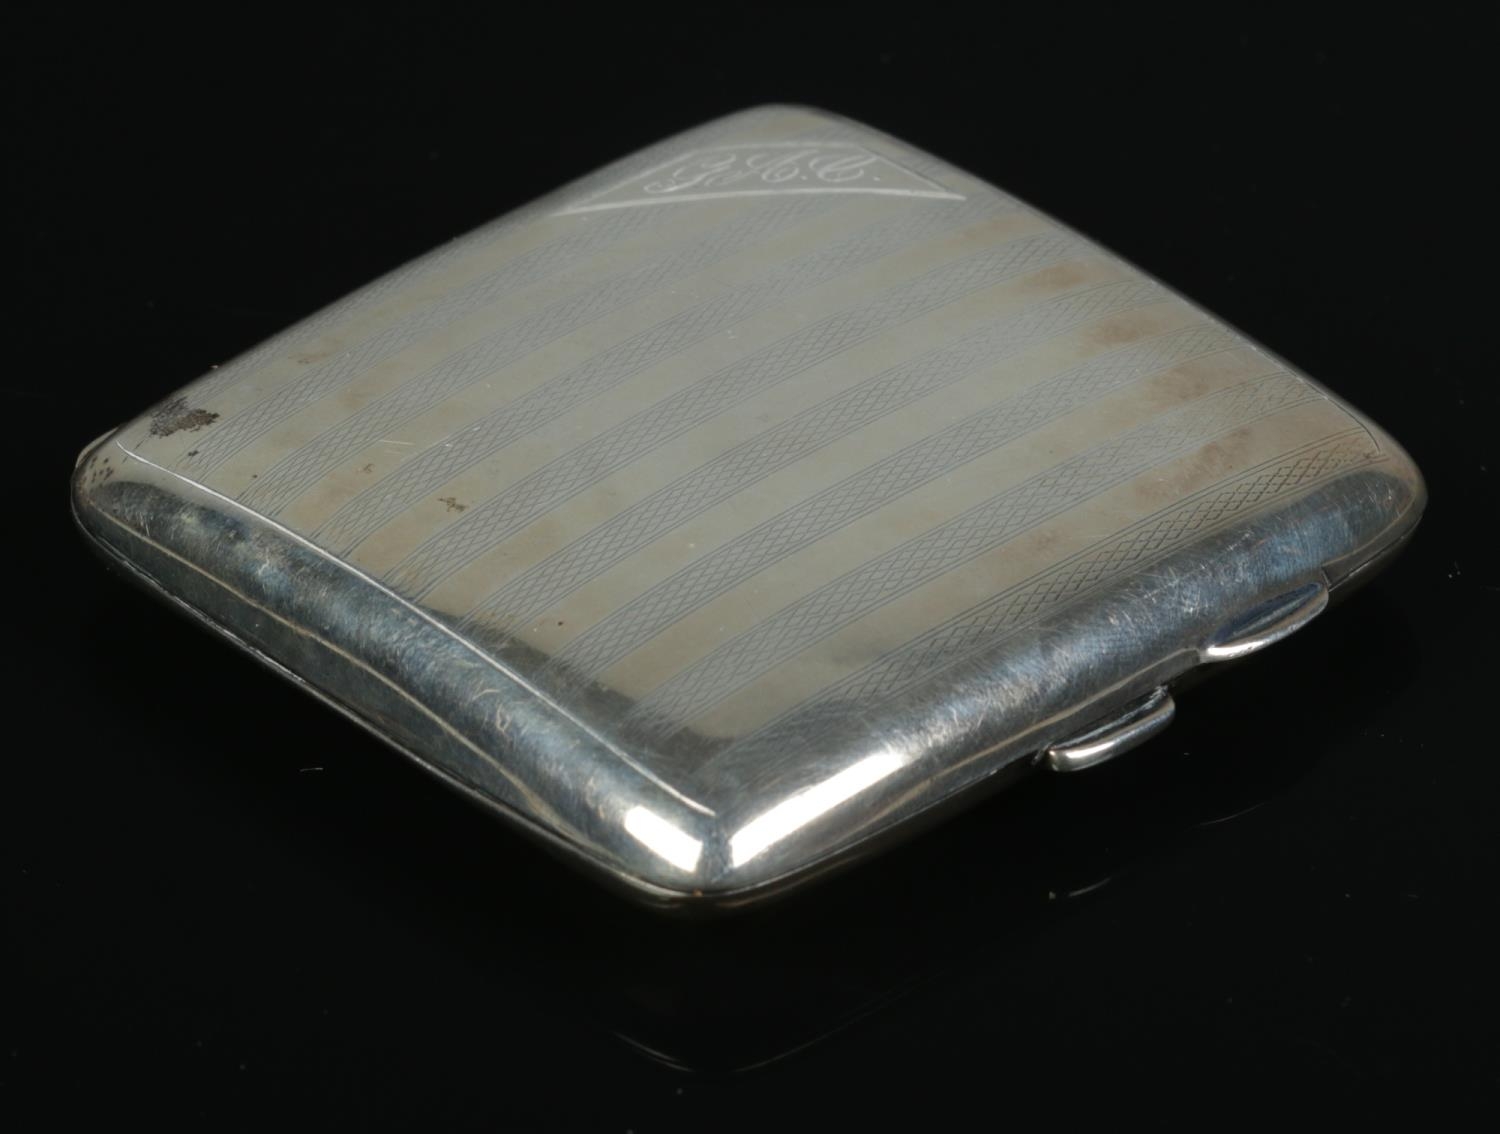 A George V silver hinged cigarette case, with banded detailing and corner cartouche with initials